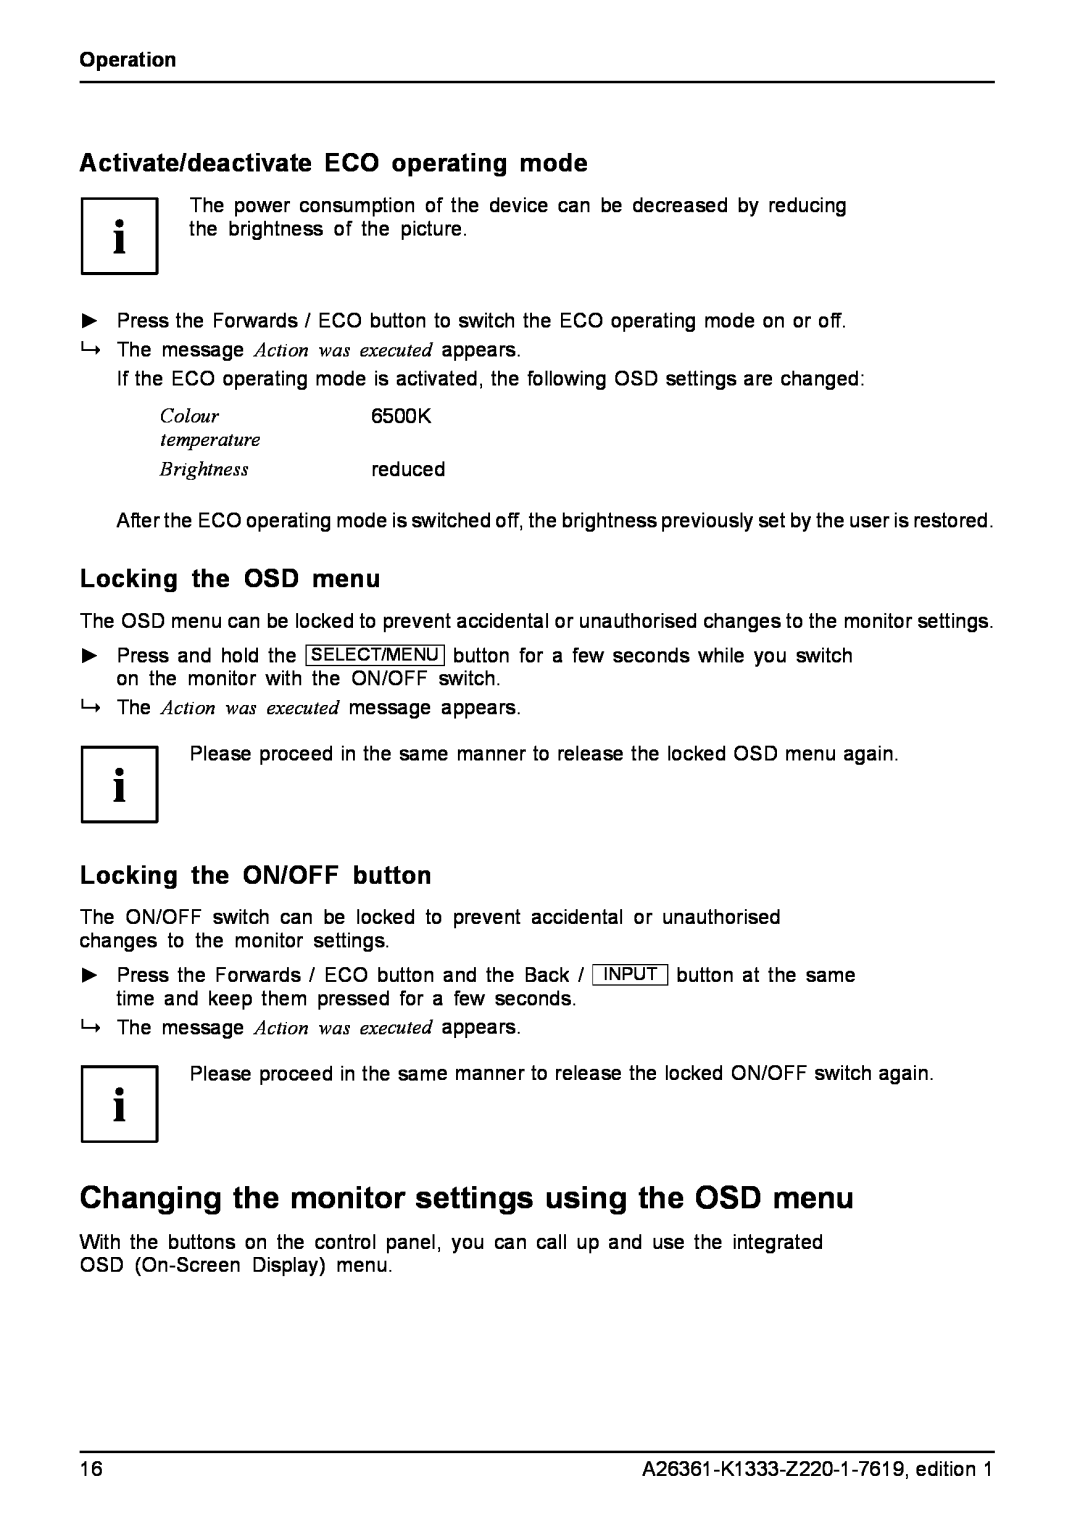 Fujitsu B19W-5 ECO Changing the monitor settings using the OSD menu, Activate/deactivate ECO operating mode, Operation 